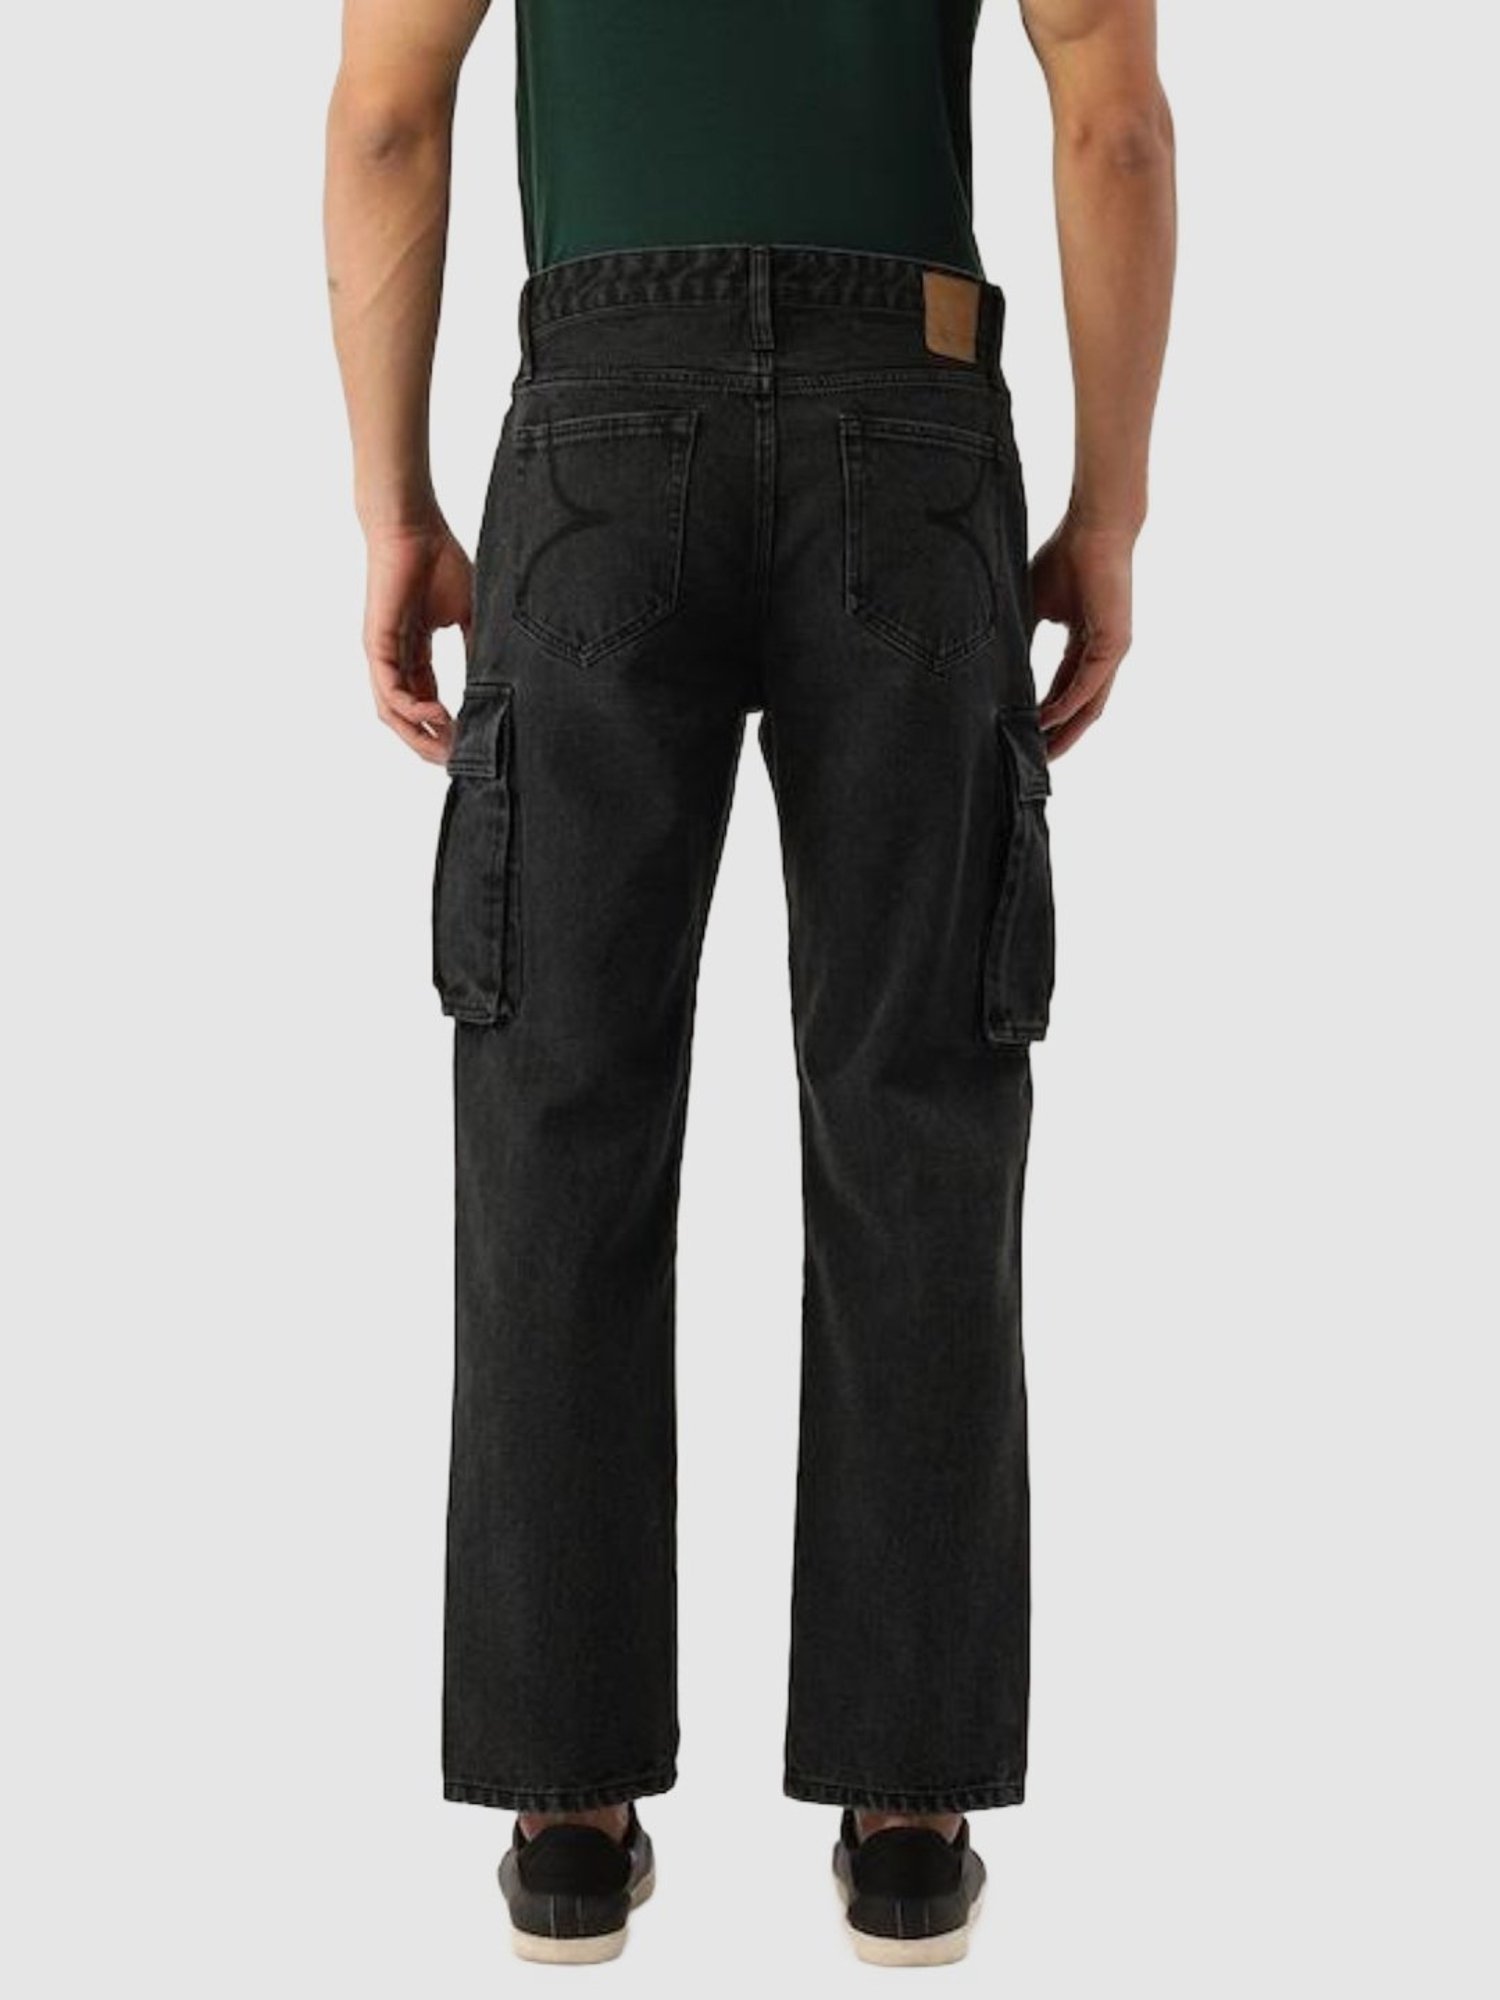 RS Taichi Quick Dry Cargo Pants Black Charcoal Moto Central